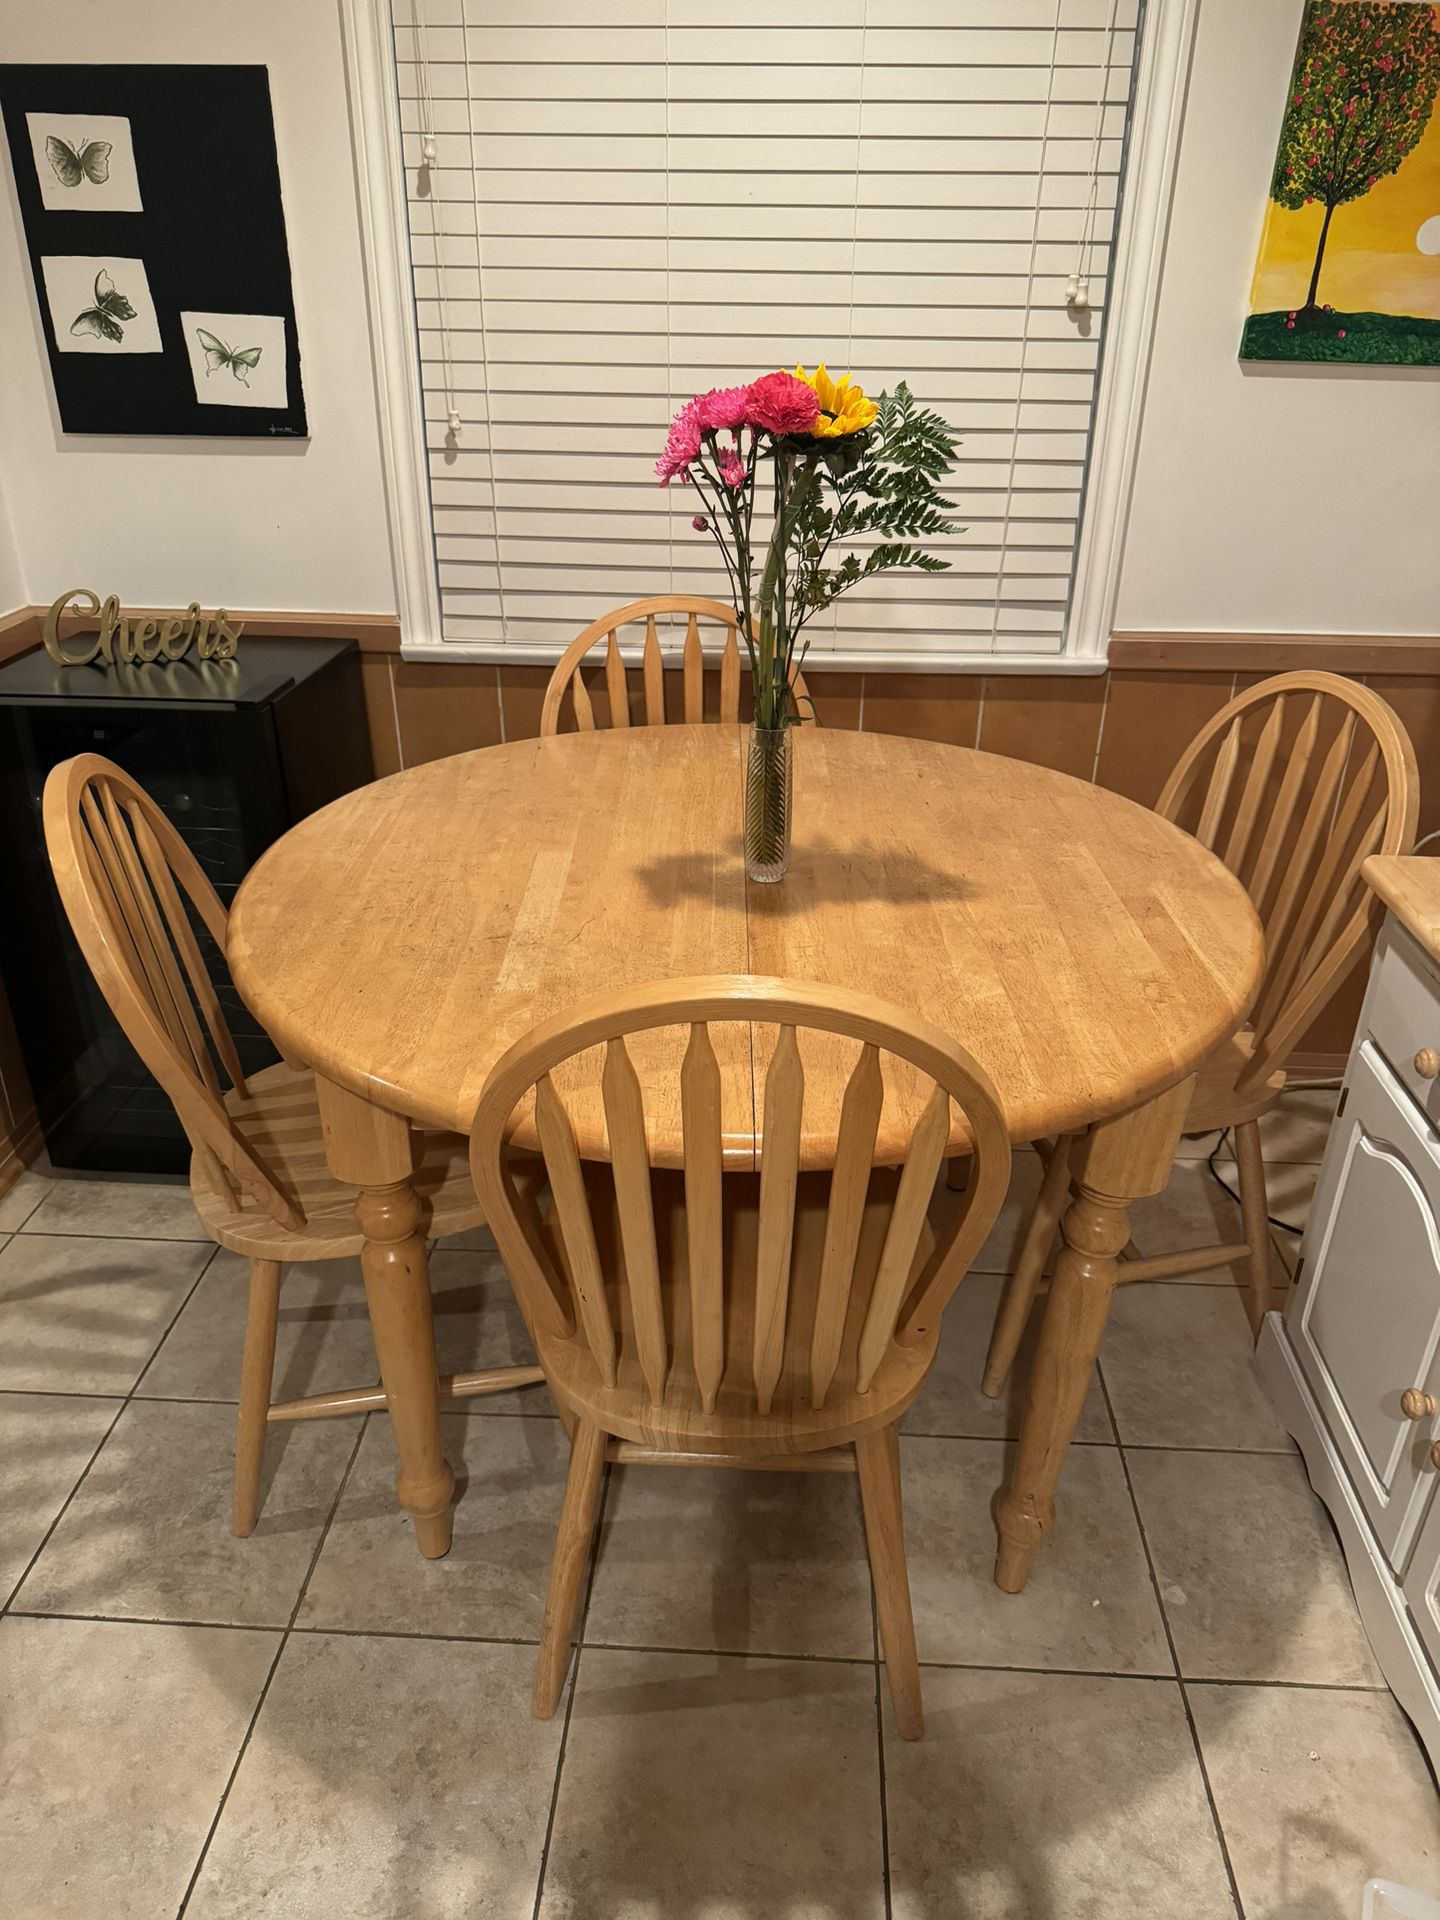 Kitchen Table & Chairs 